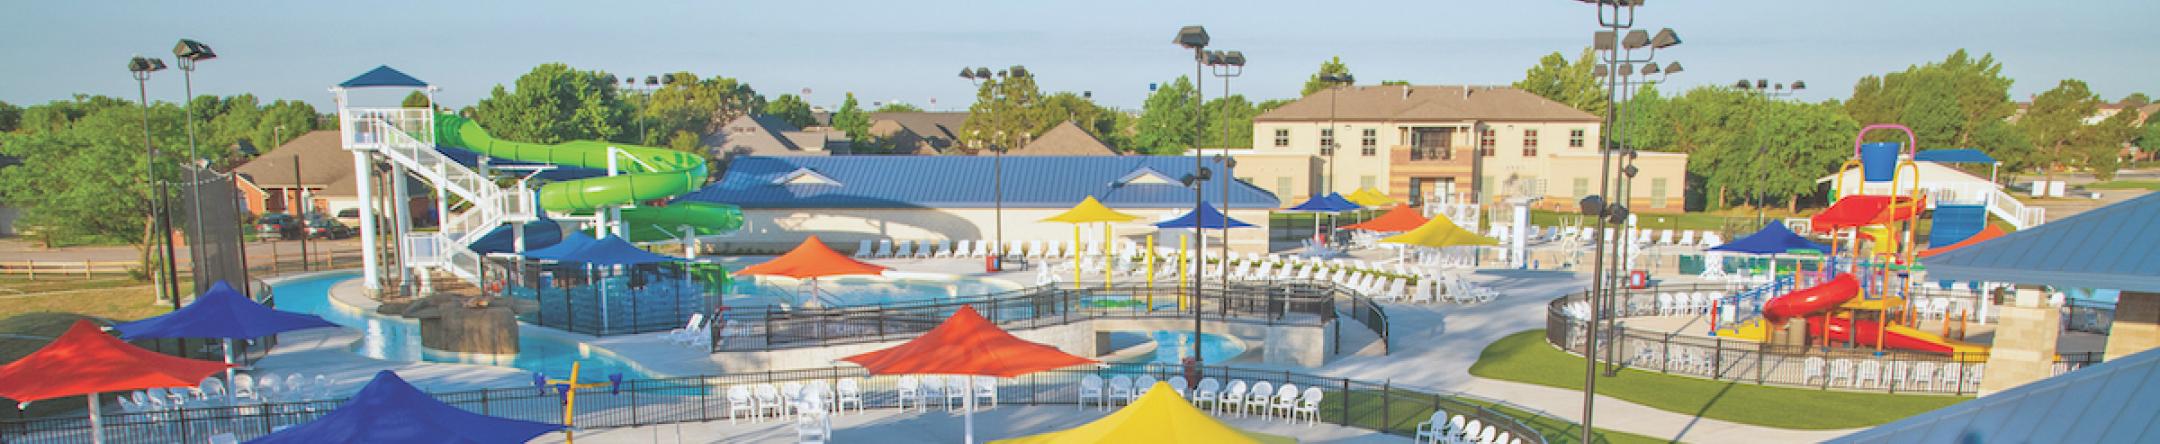 Westwood Pool Overview